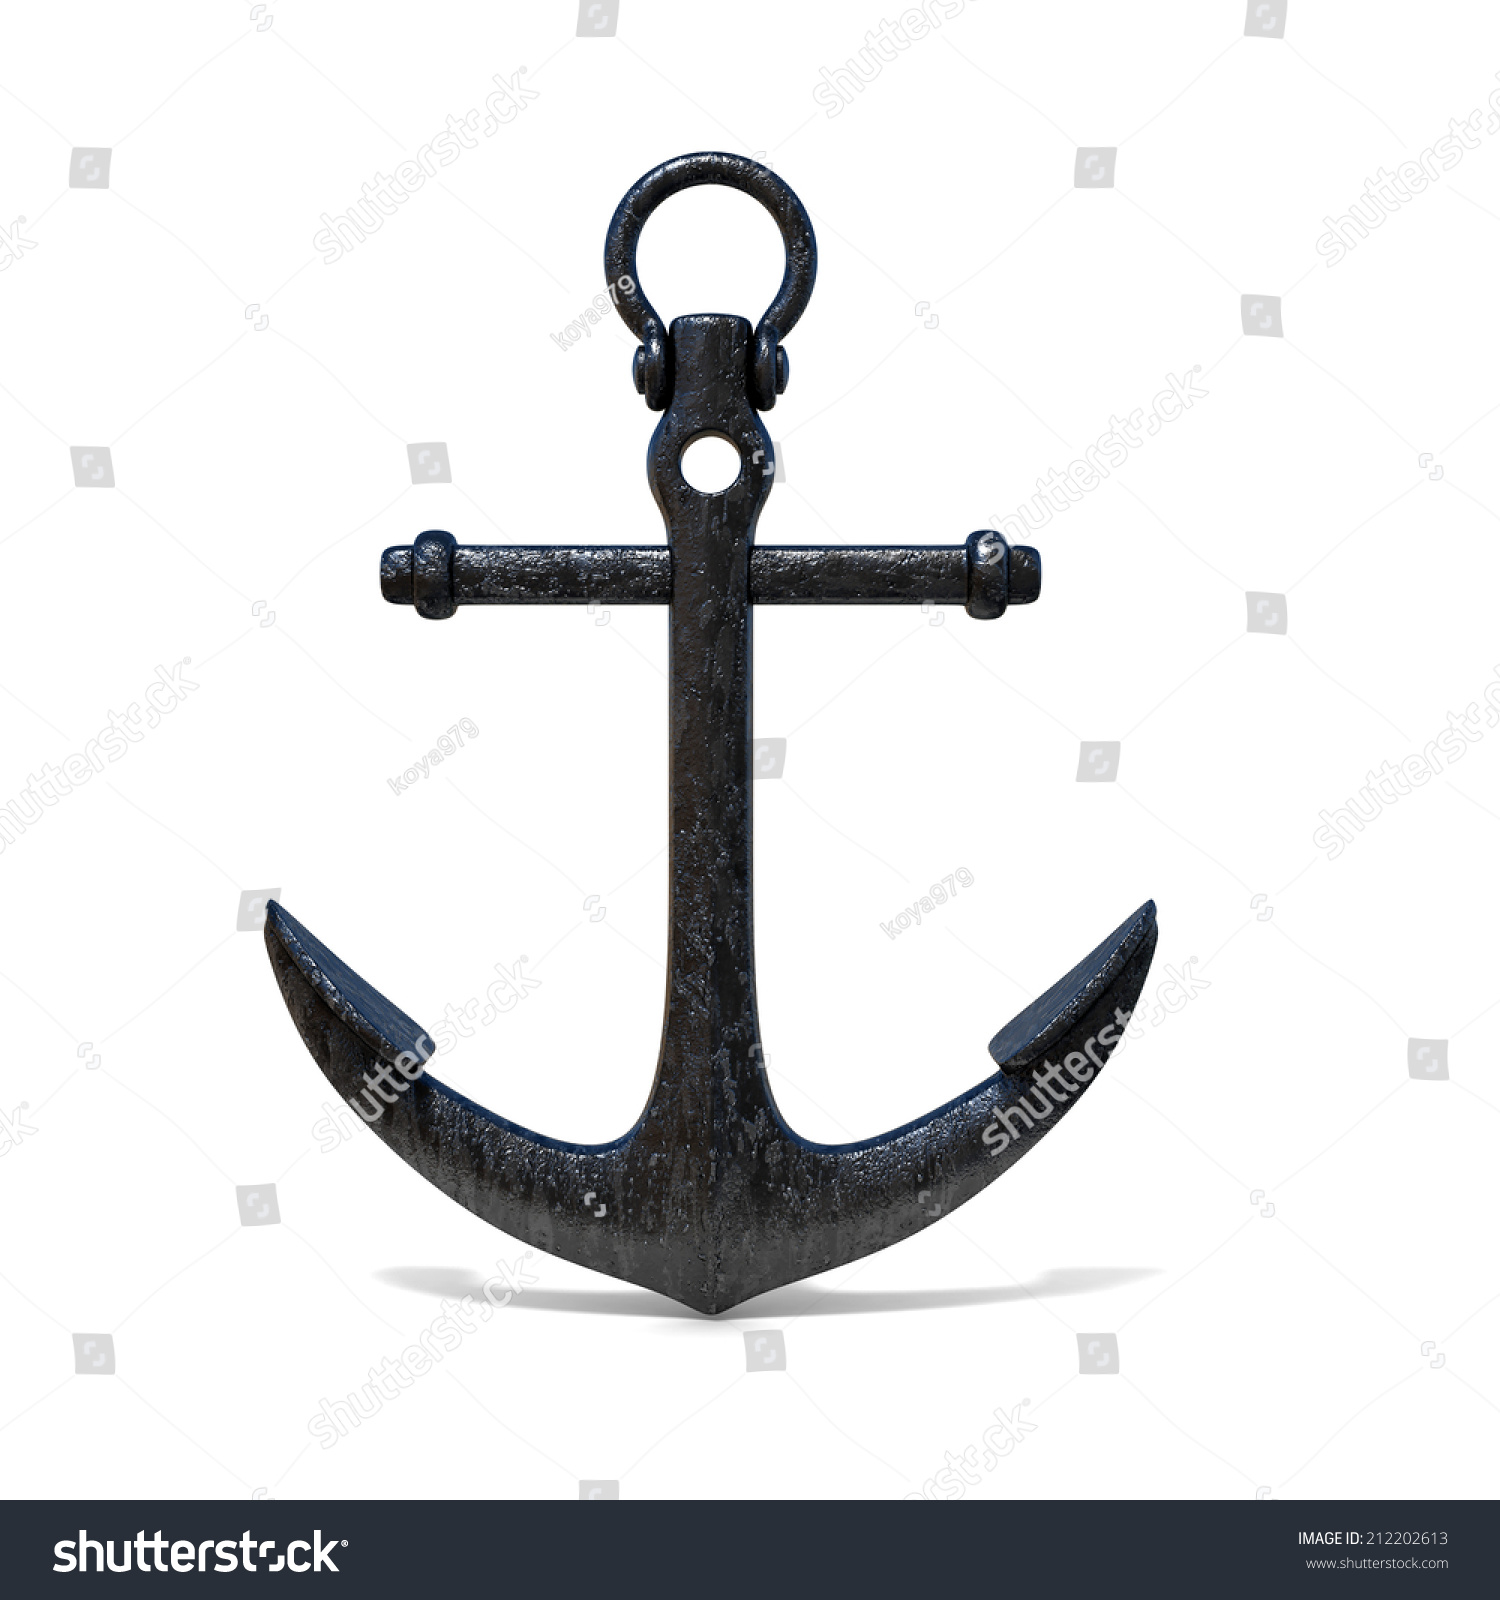 Royalty-free Black rusty anchor on white background #212202613 Stock ...